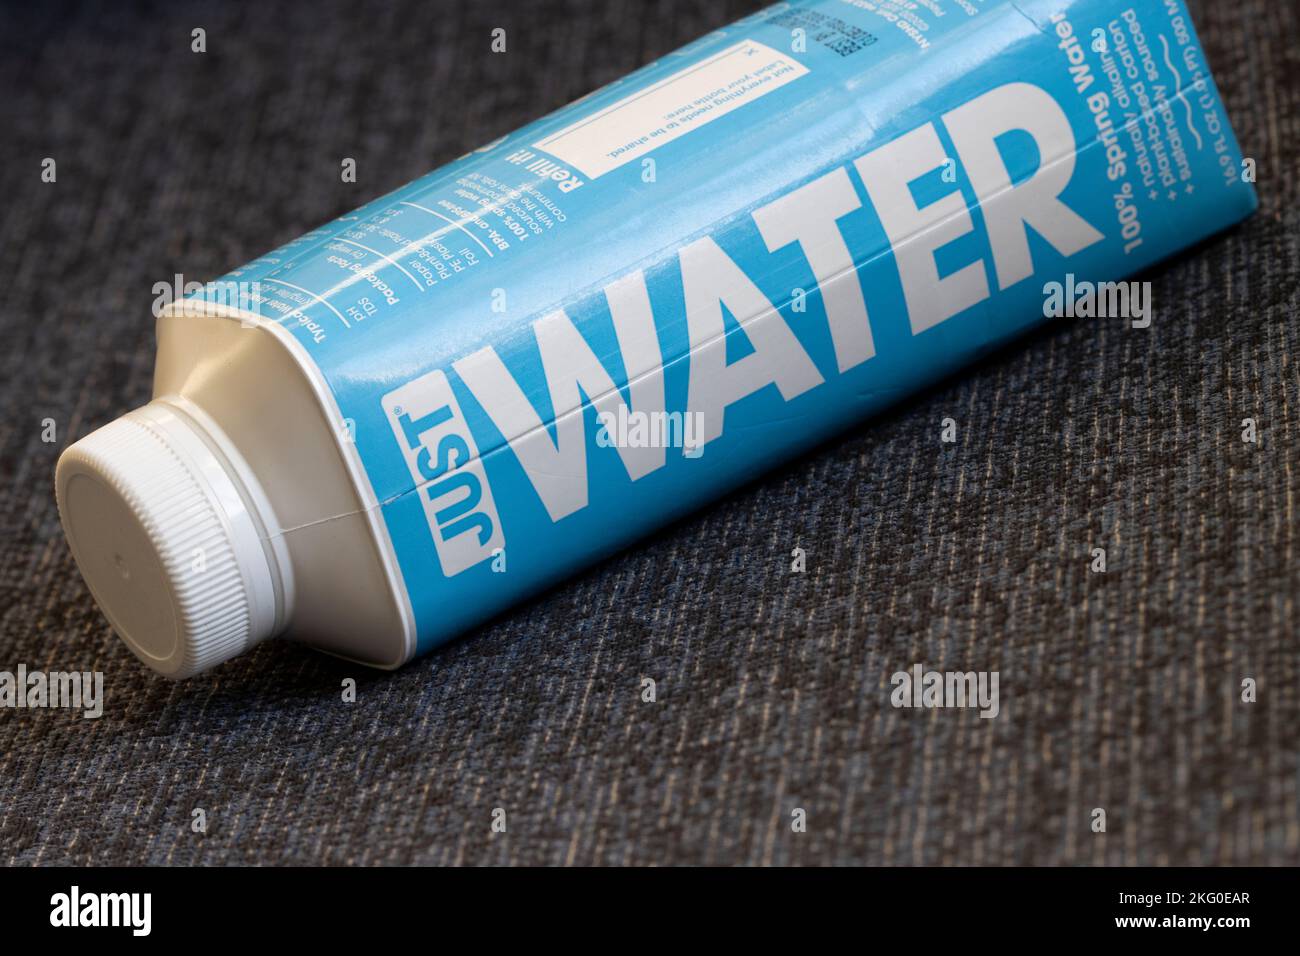 Closeup of a bottle of Just Water. The company claims that the product is natural mountain-sourced spring water from Montana. Stock Photo